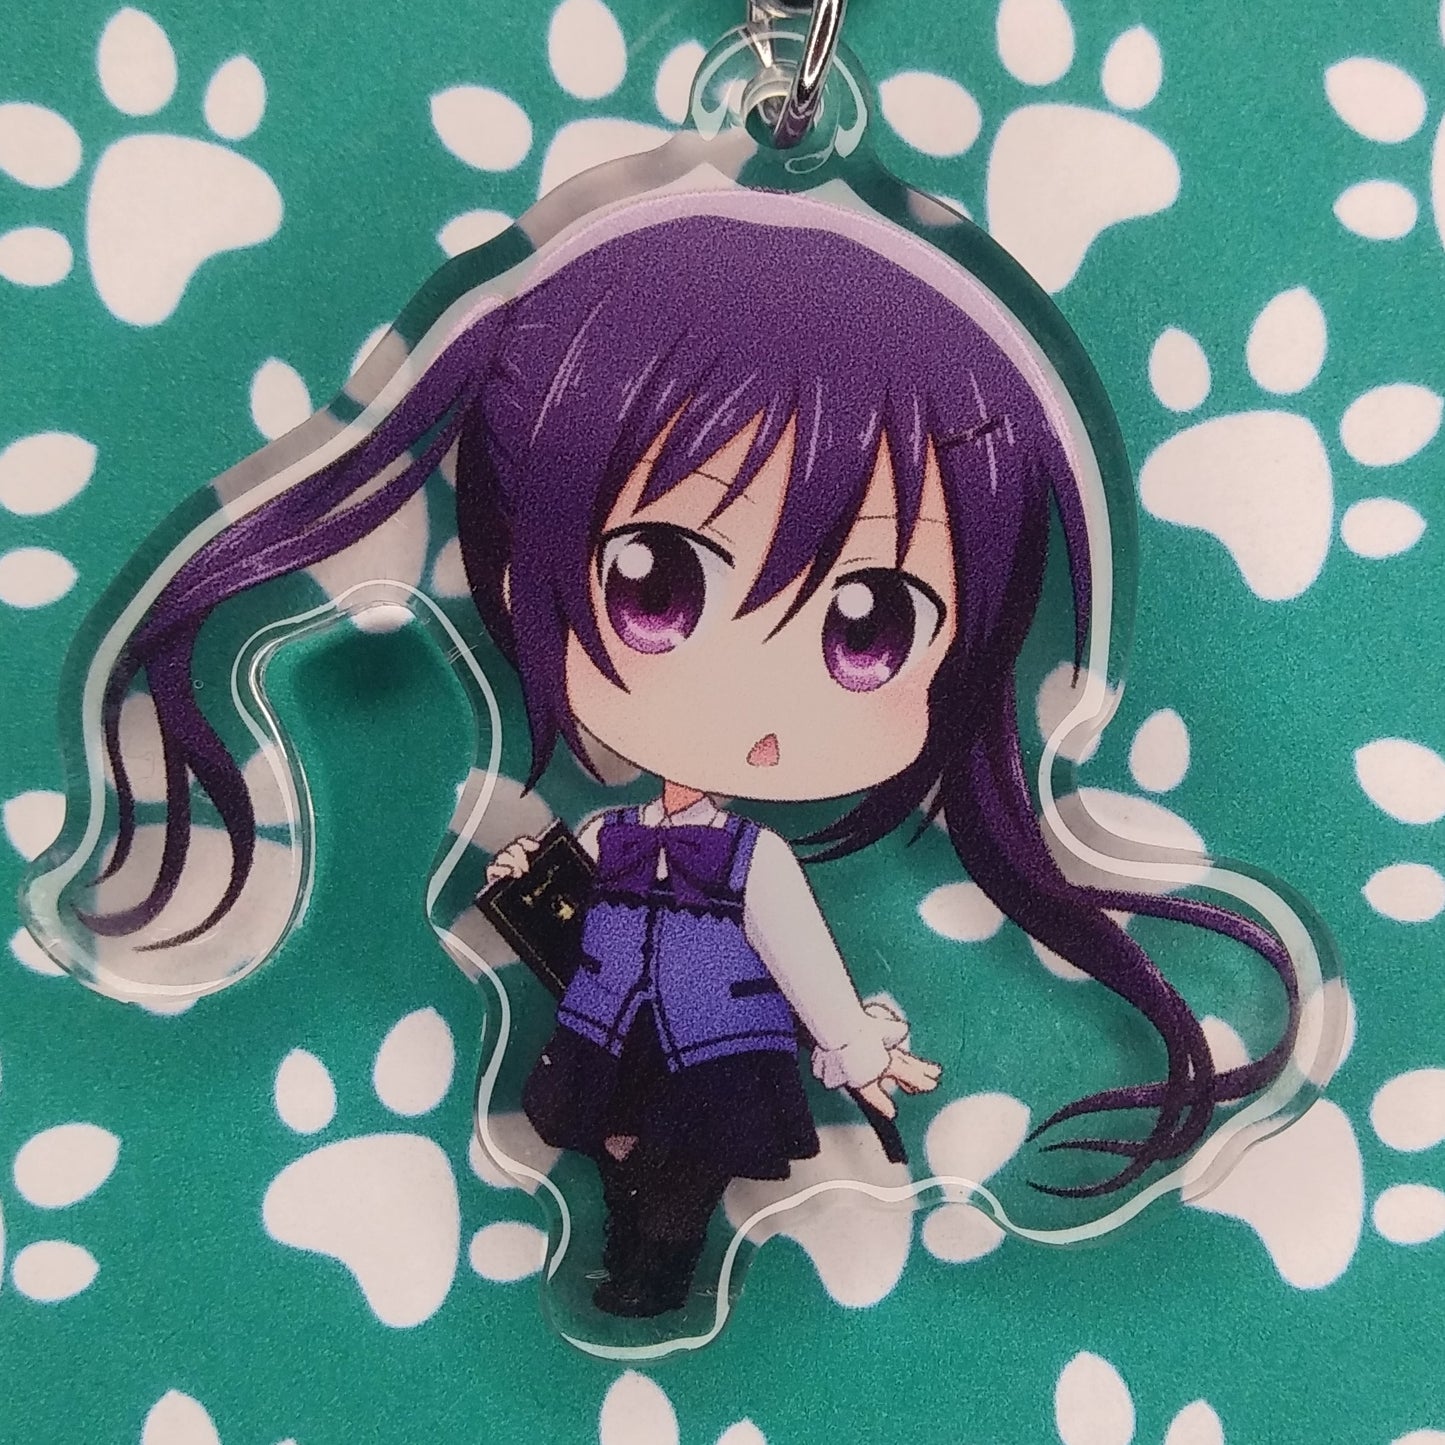 Is The Order A Rabbit? Rize ANIMEinU Keychain